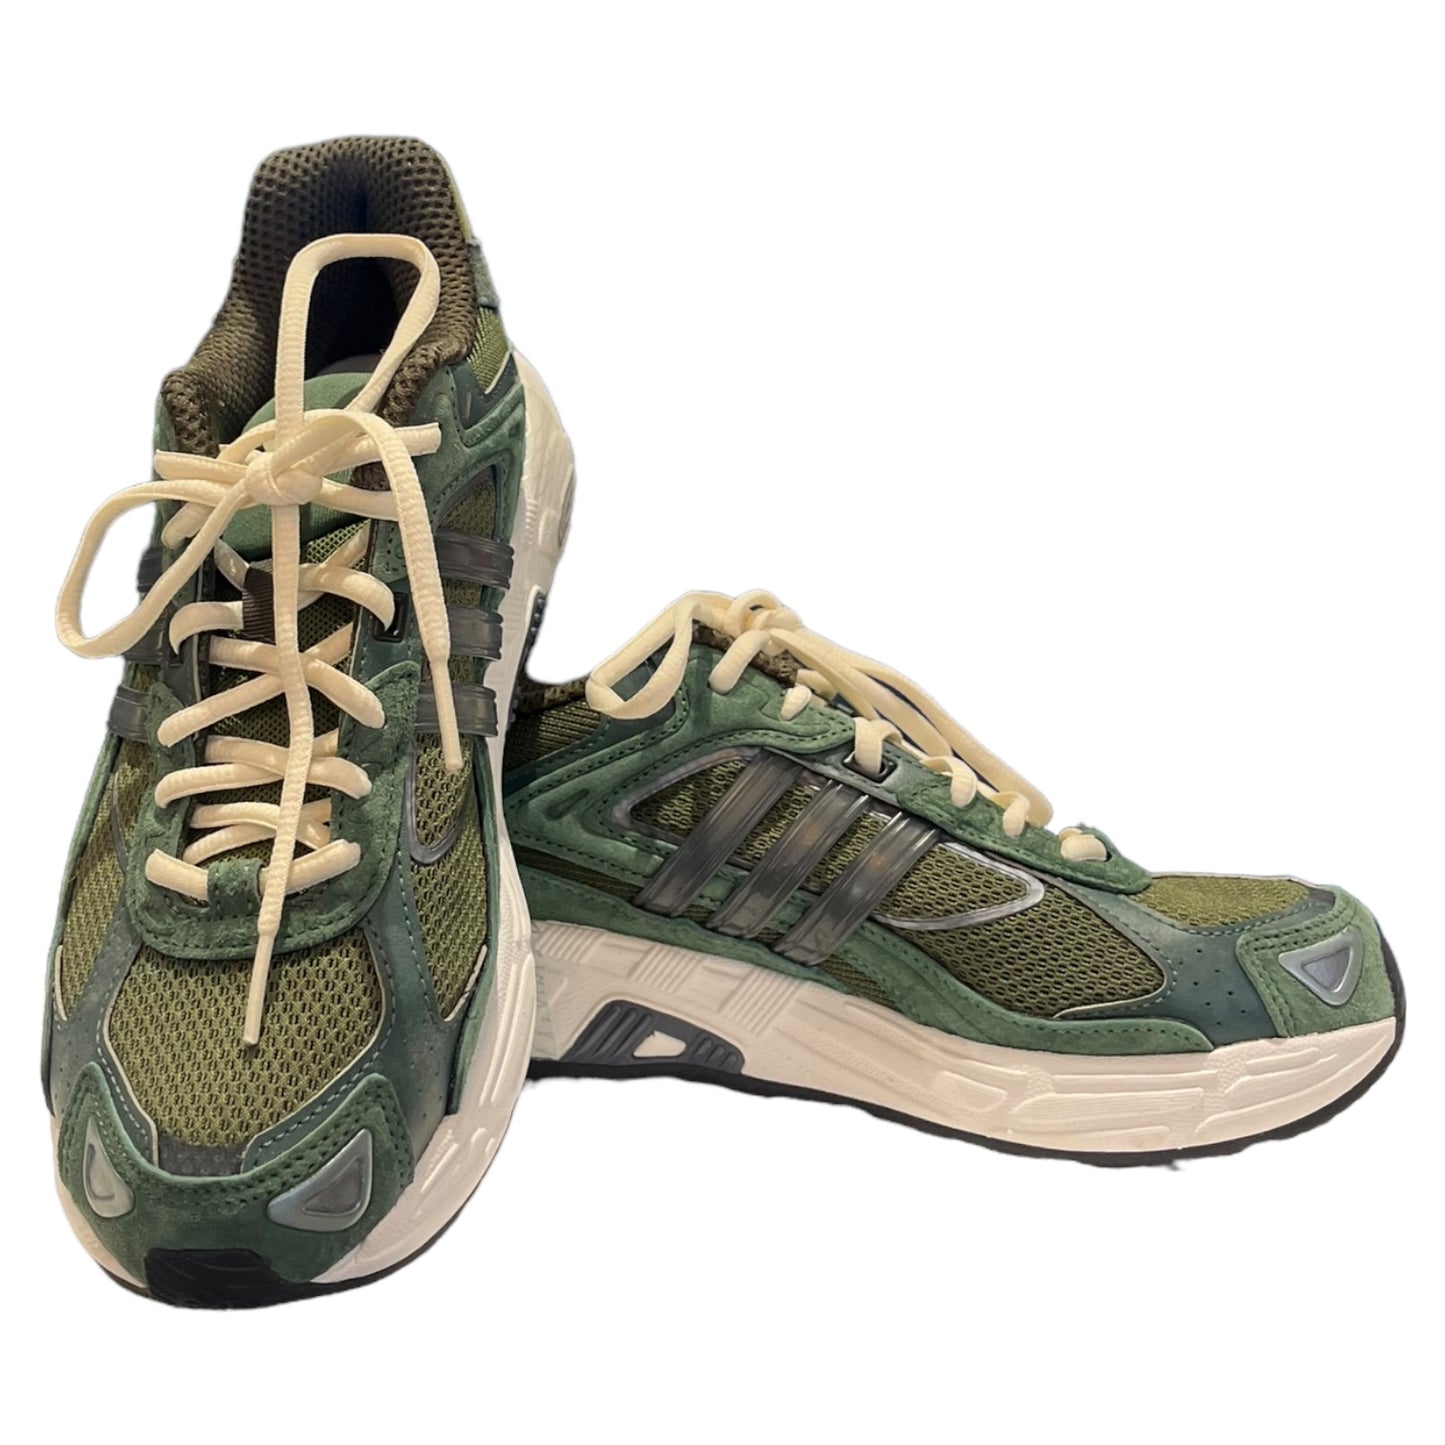 Adidas Green Response Trainers